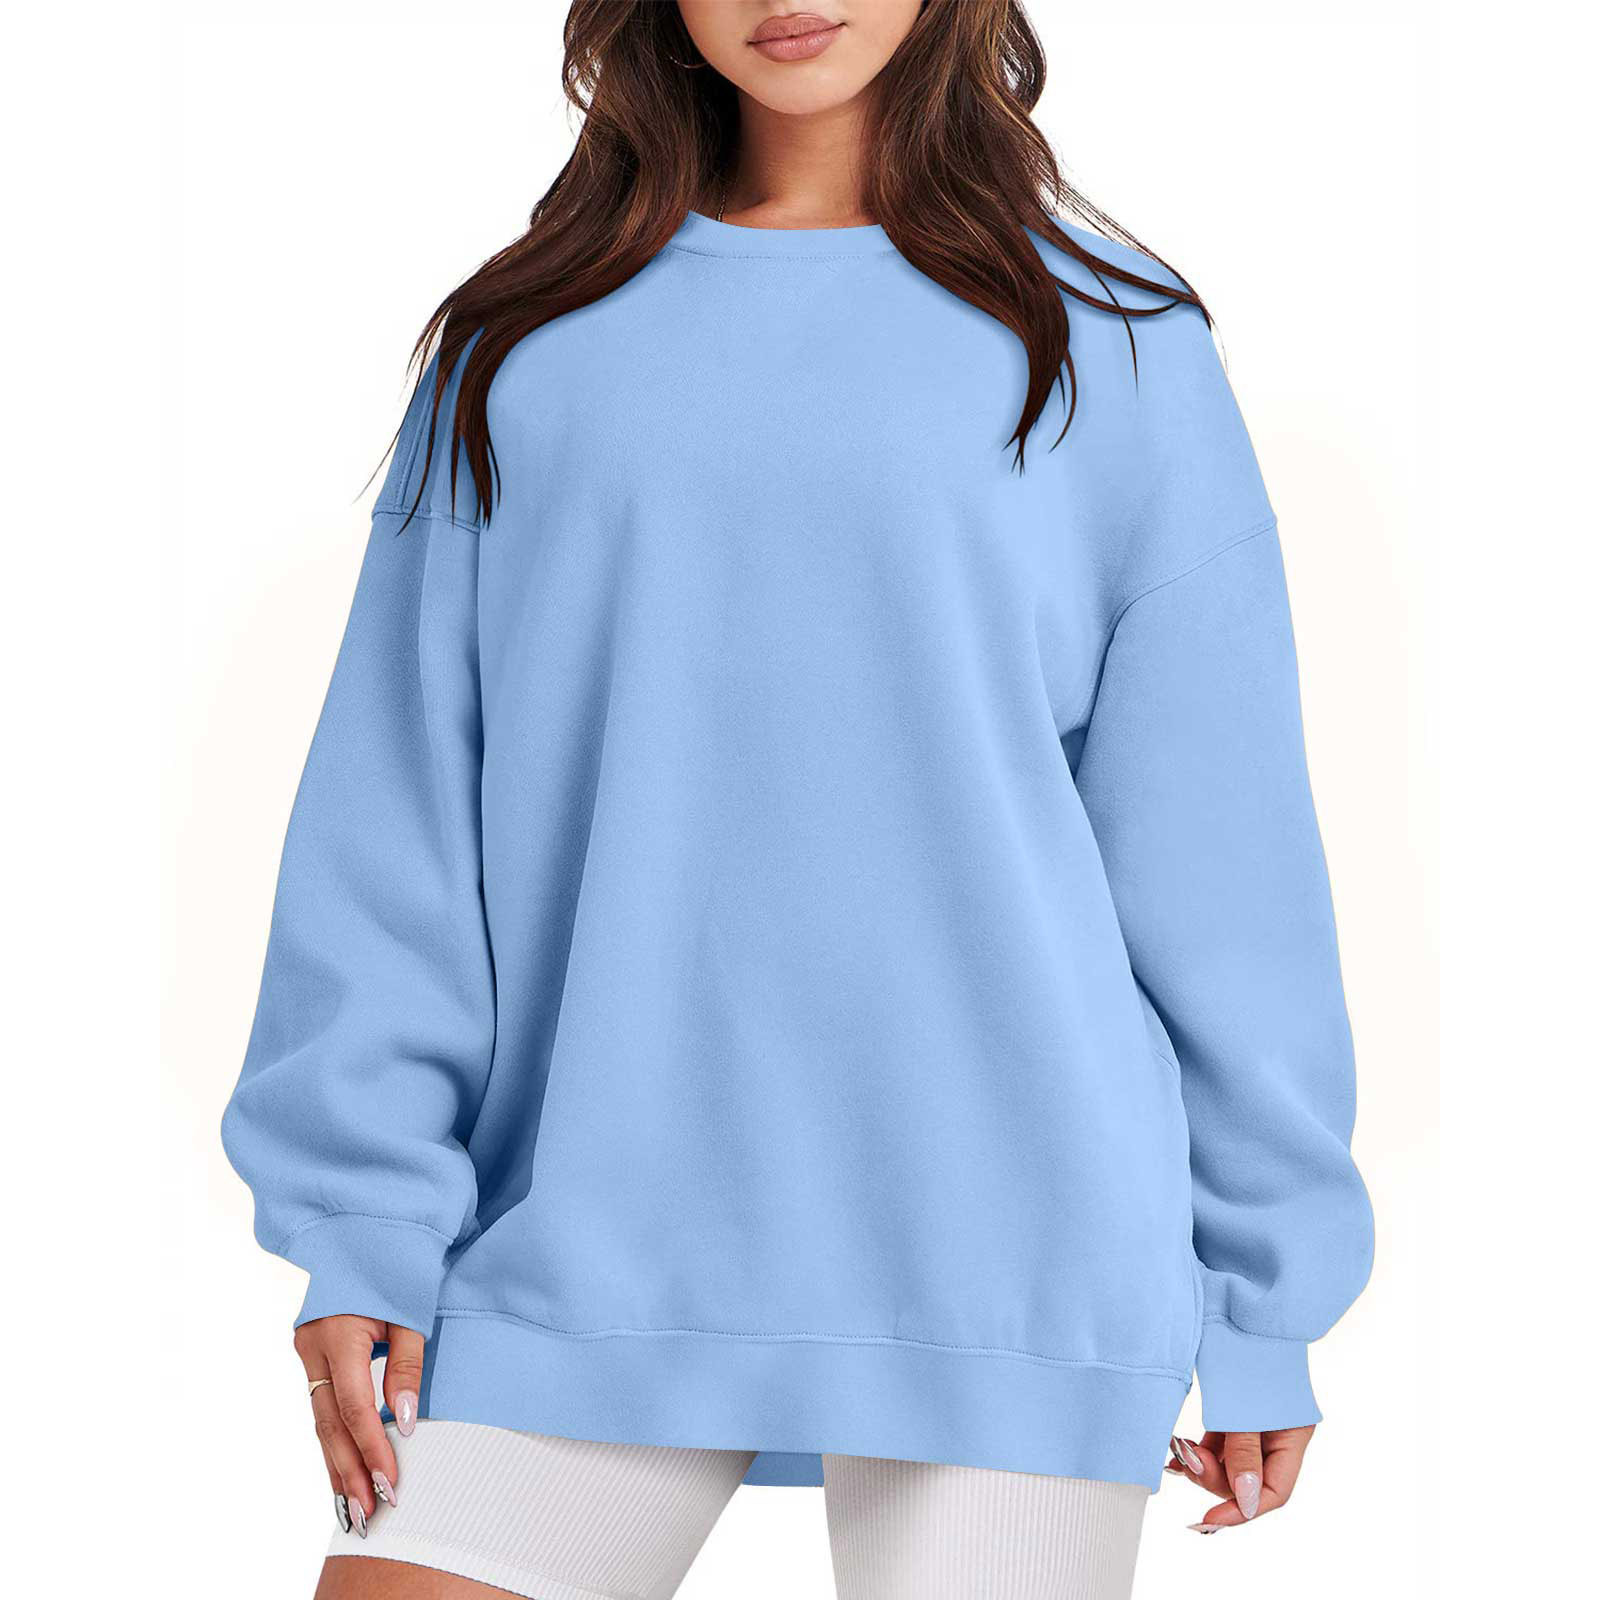 YYDGH Oversized Sweatshirt for Women Fleece Long Sleeve Crewneck Casual  Pullover Hoodie Tops Fall Y2K Trendy Clothes Light Blue S